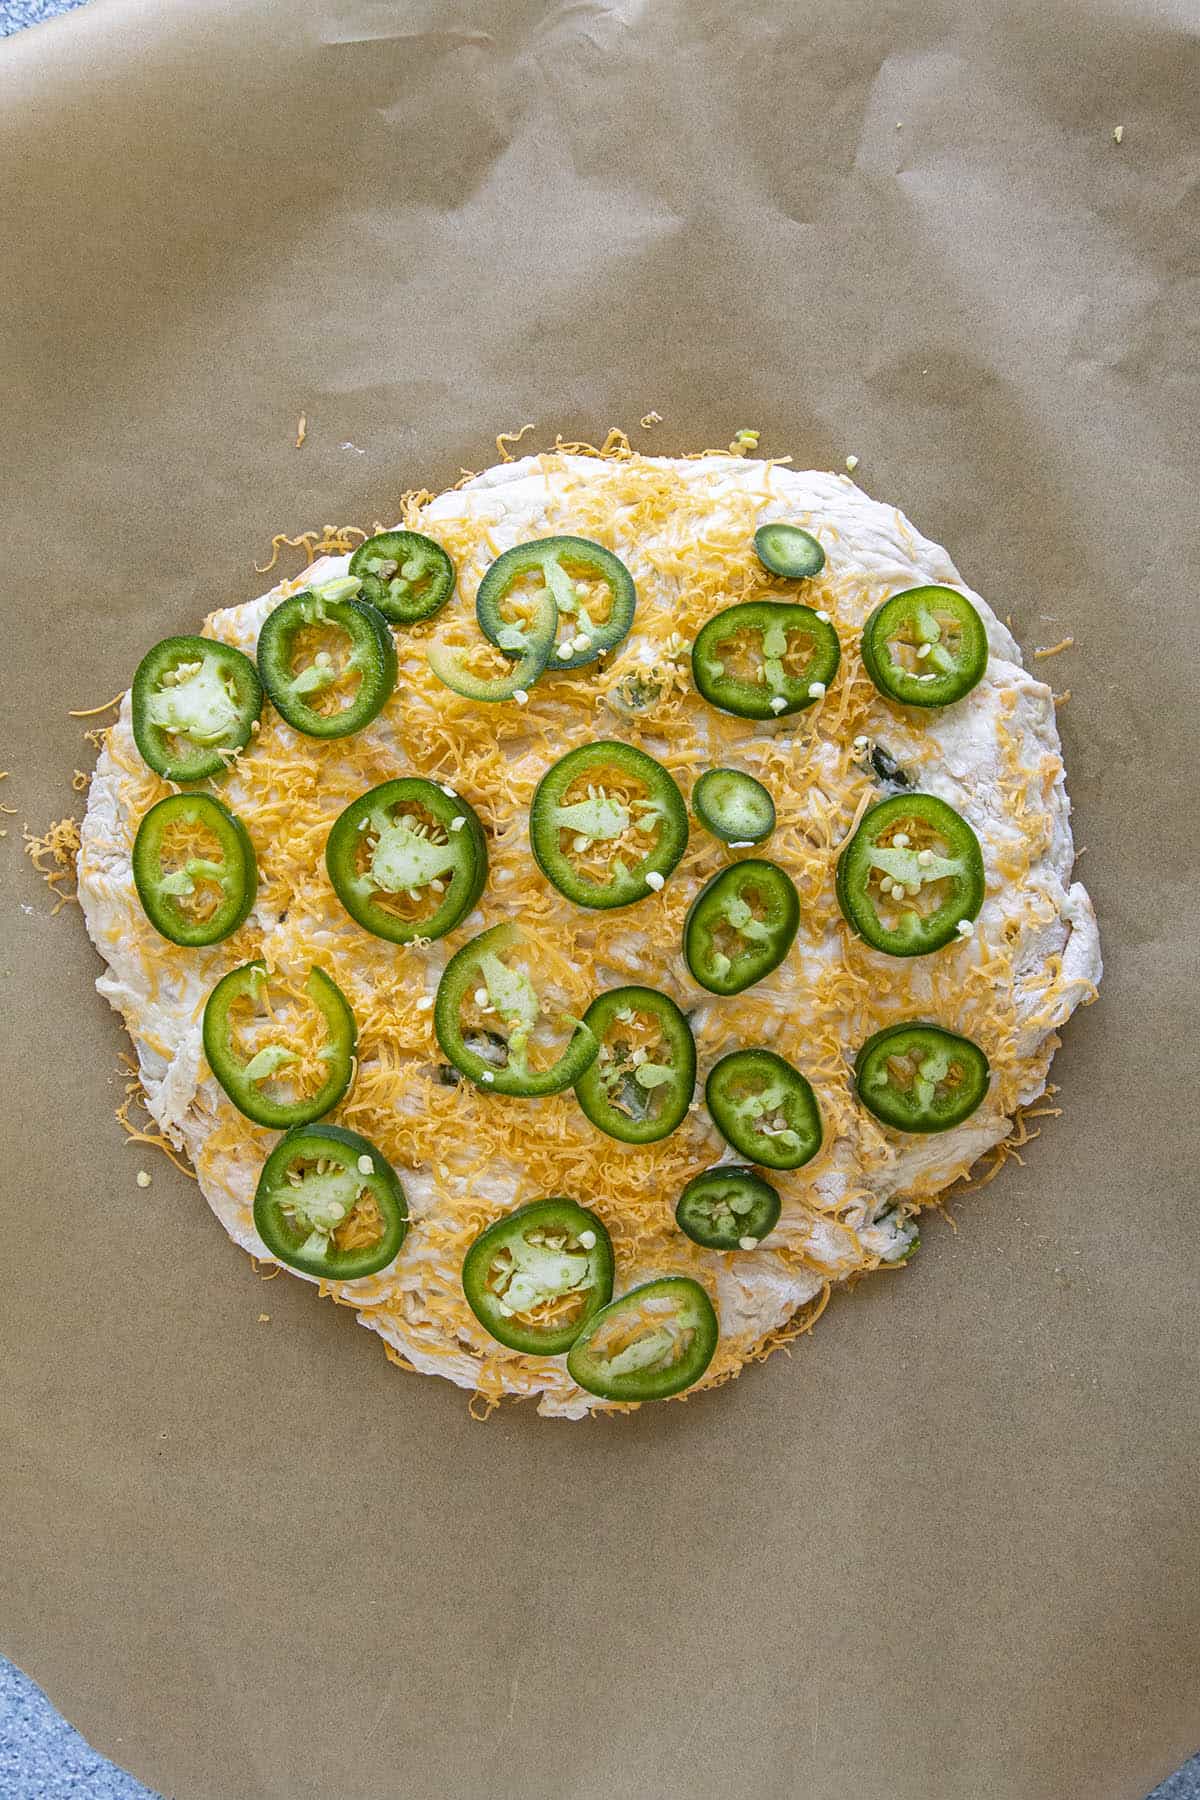 Jalapeno Cheddar Dutch oven bread ready for baking